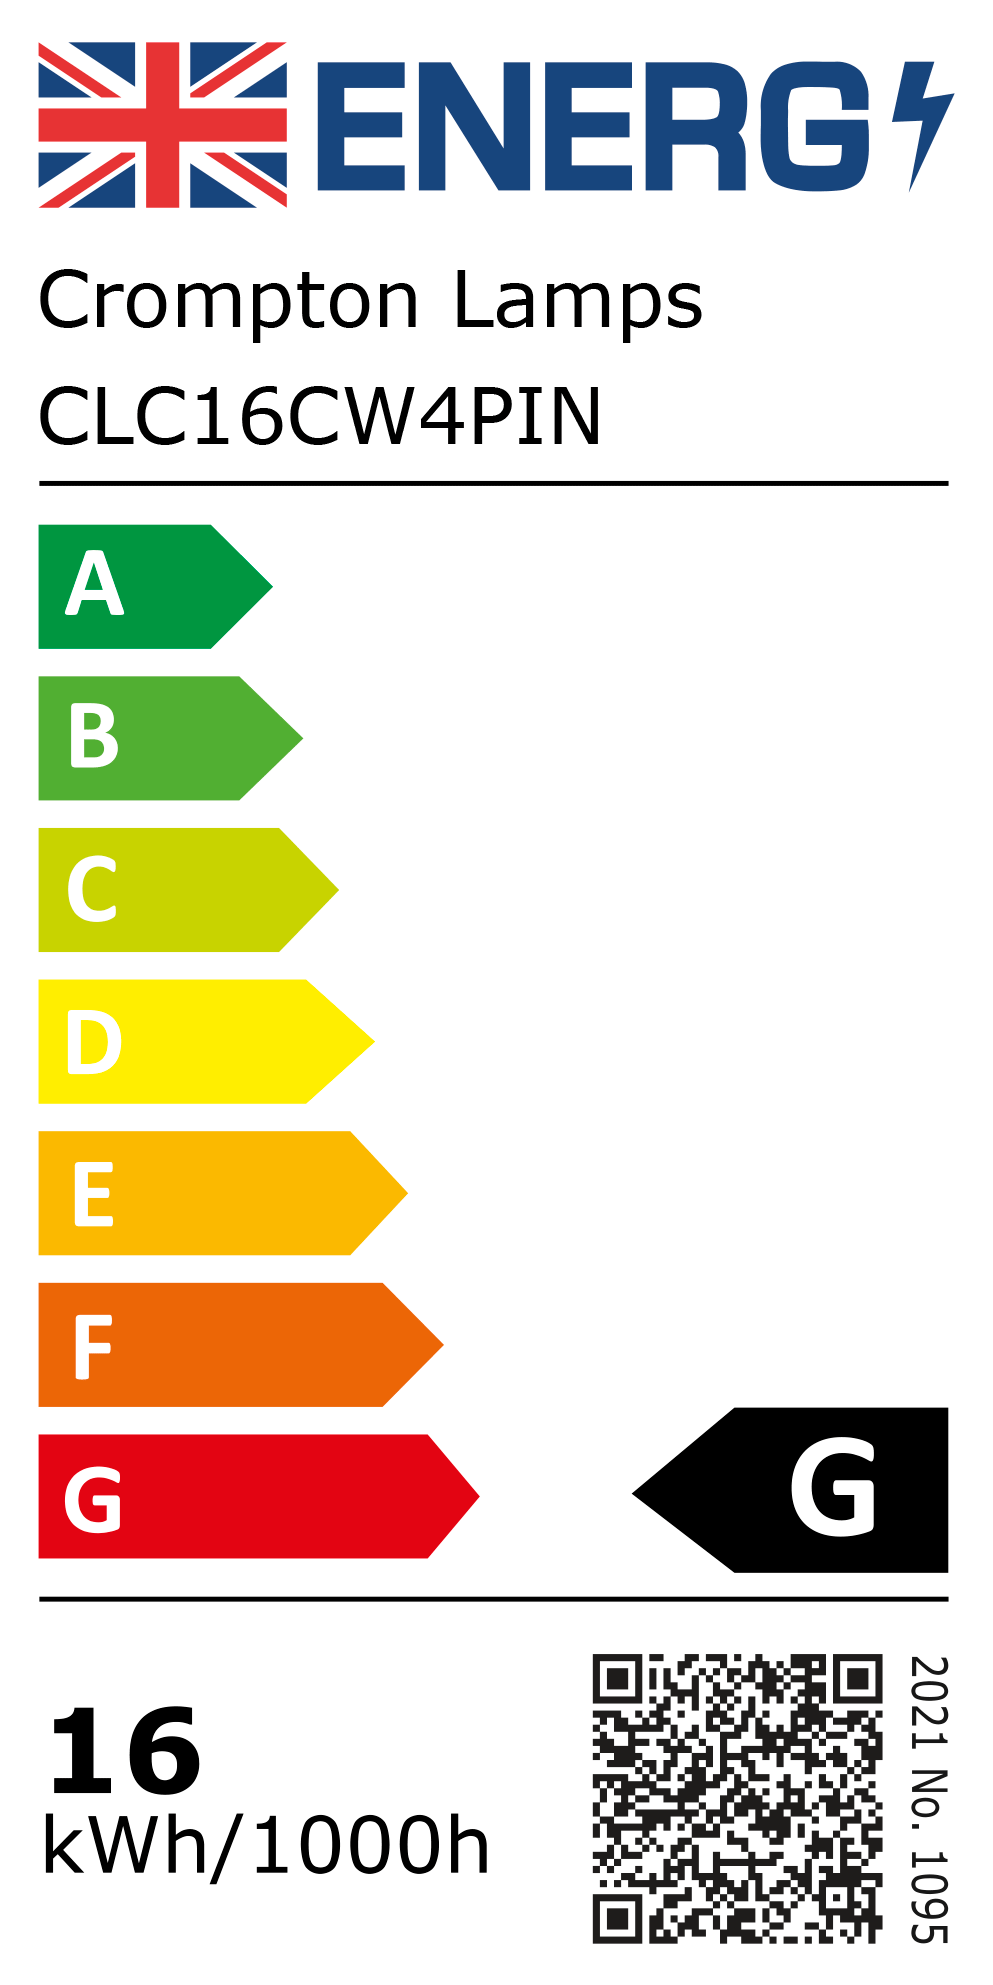 New 2021 Energy Rating Label: Stock Code CLC16CW4PIN